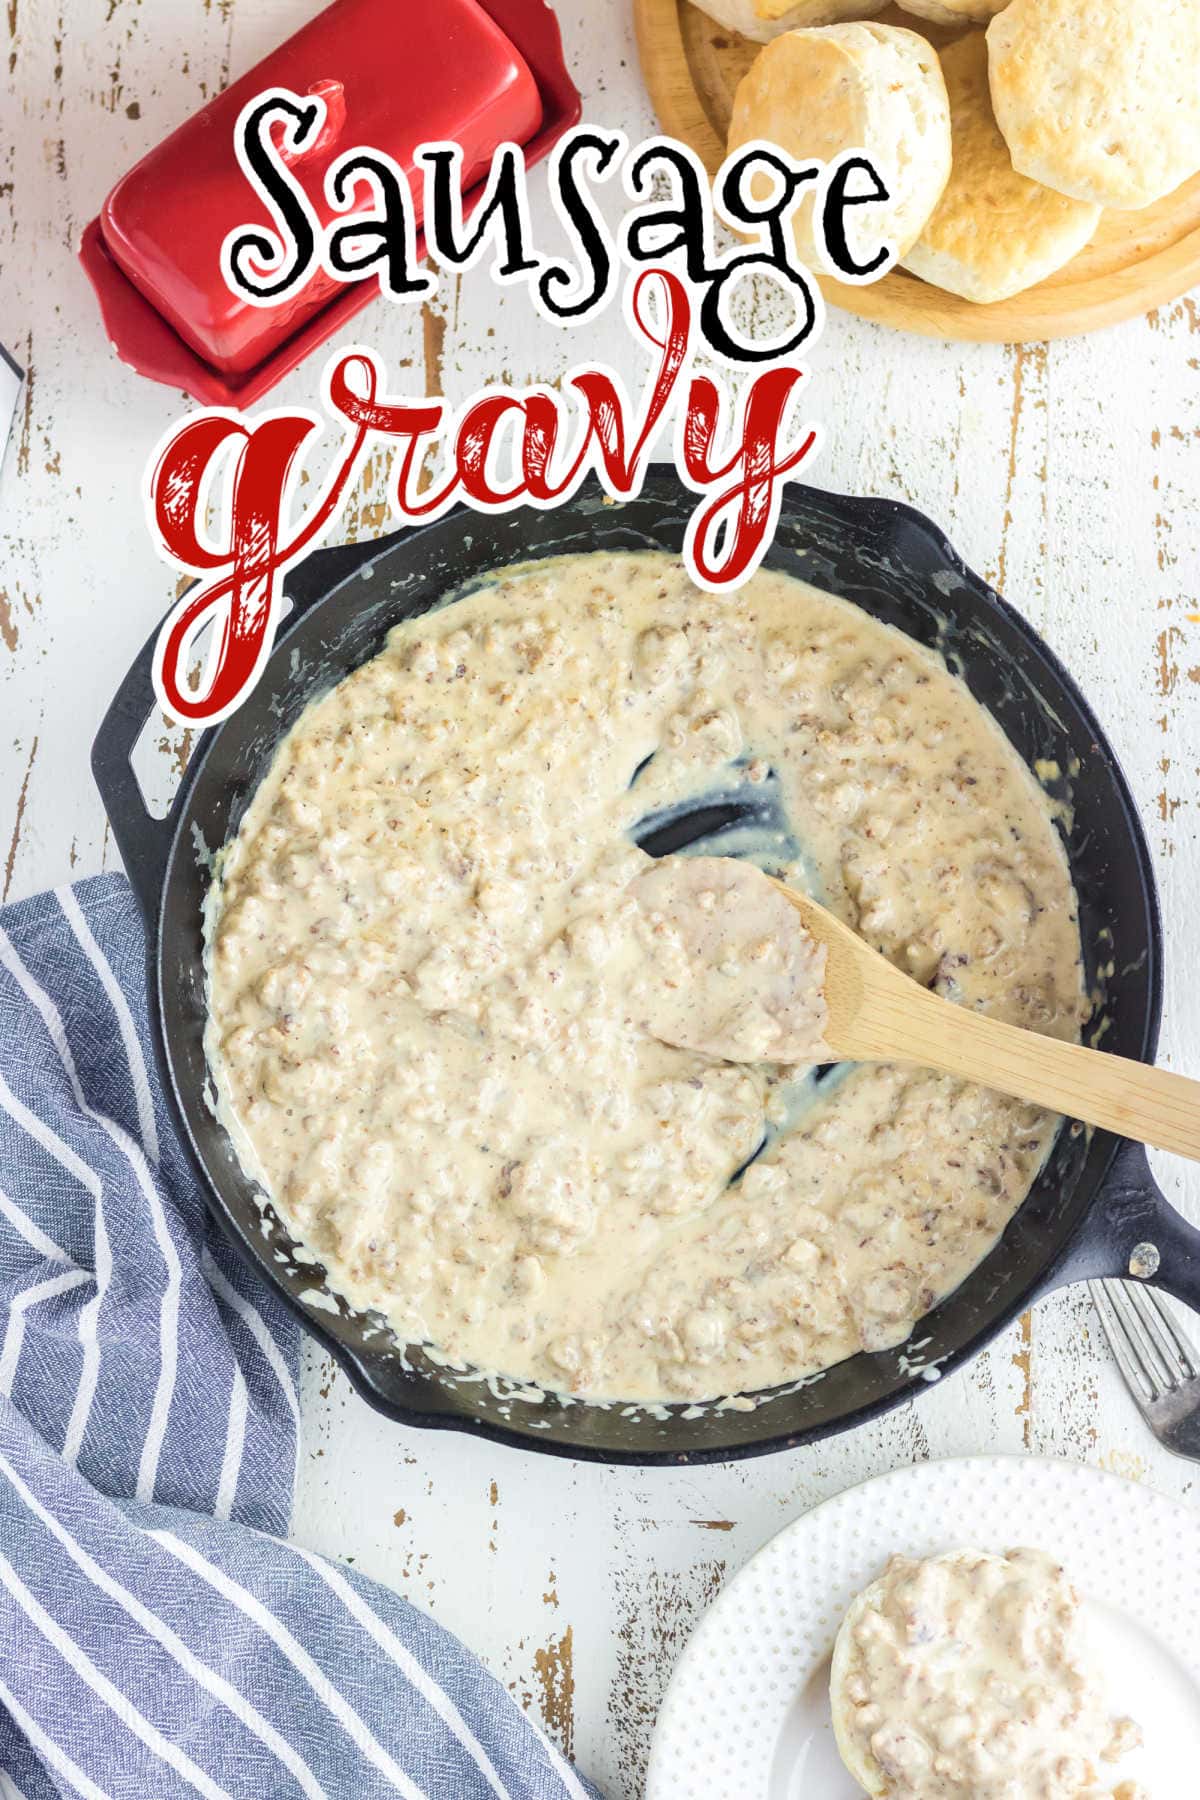 Overhead view of a skillet with gravy in it. Title text overlay.